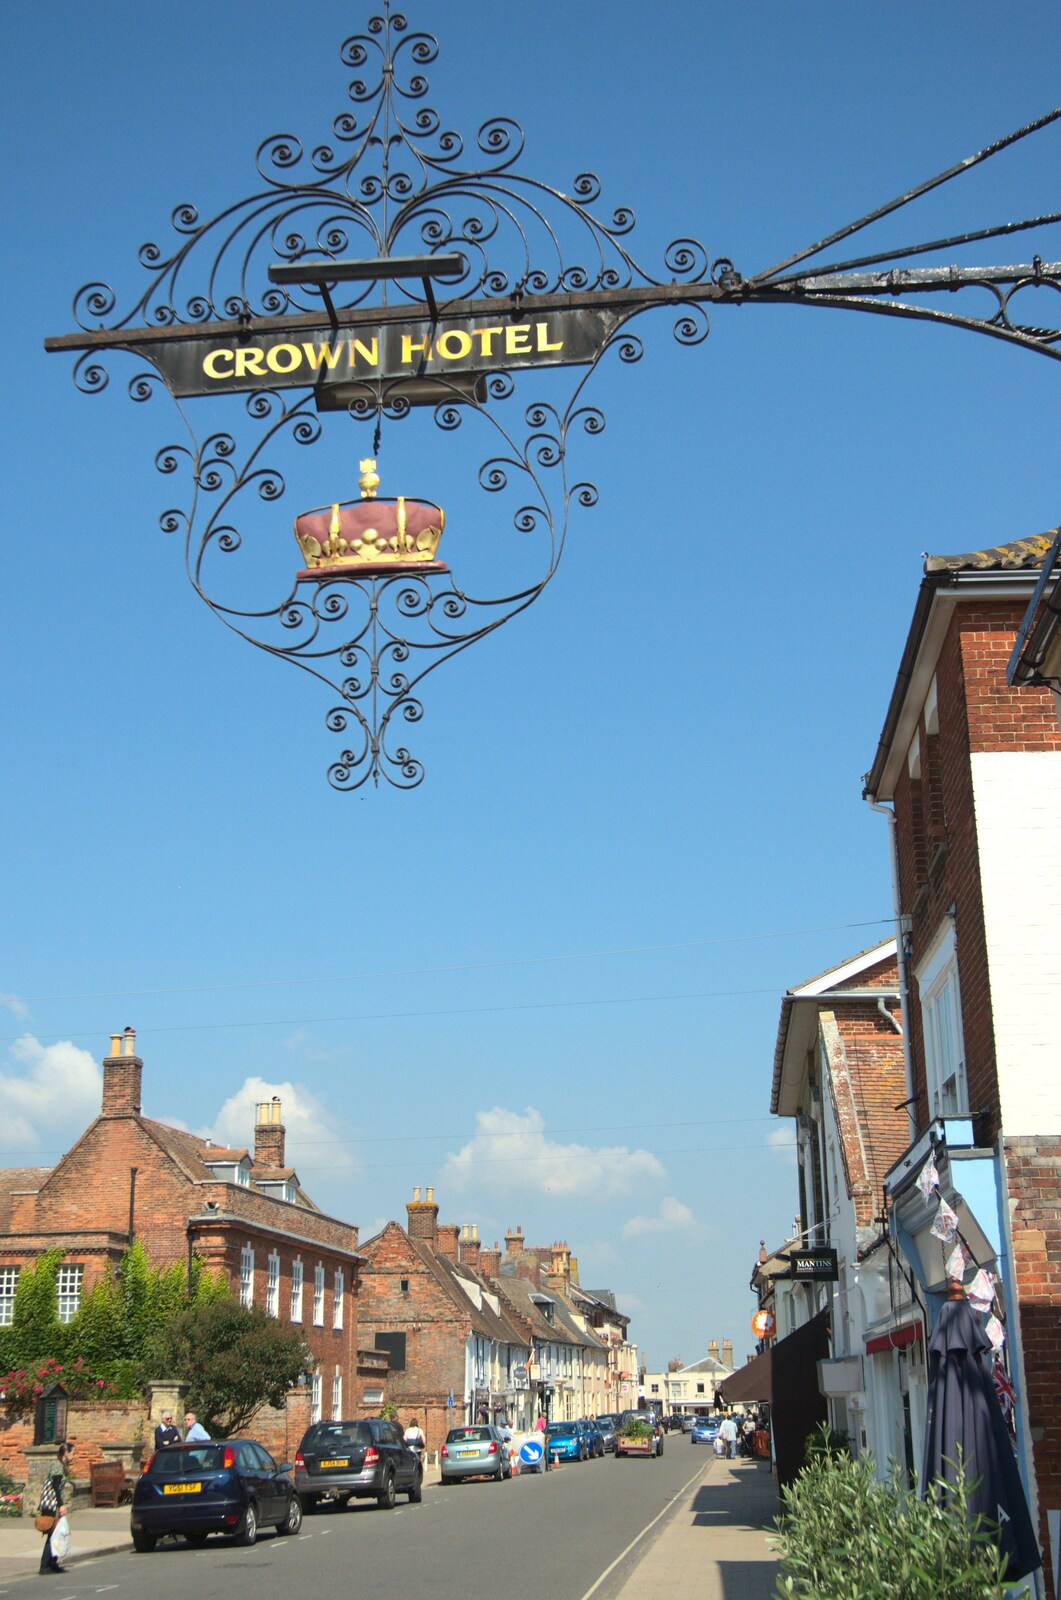 The High Street, and the Crown Hotel's sign from The First Anniversary, Southwold, Suffolk - 3rd July 2011